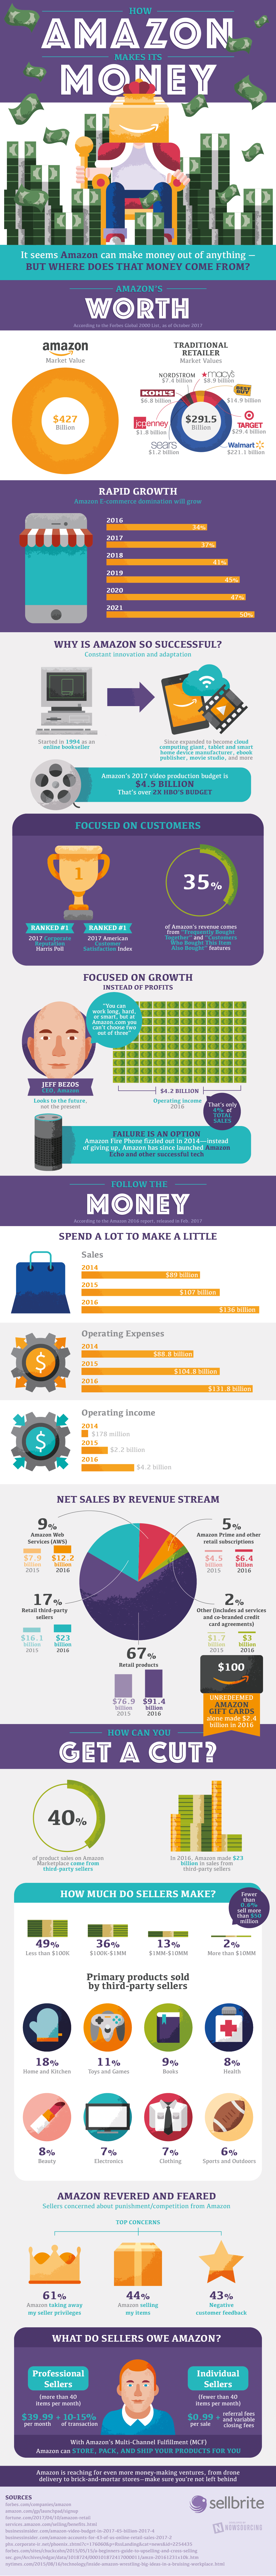 Leveraging Amazon’s Success To Grow Your Business [Infographic]